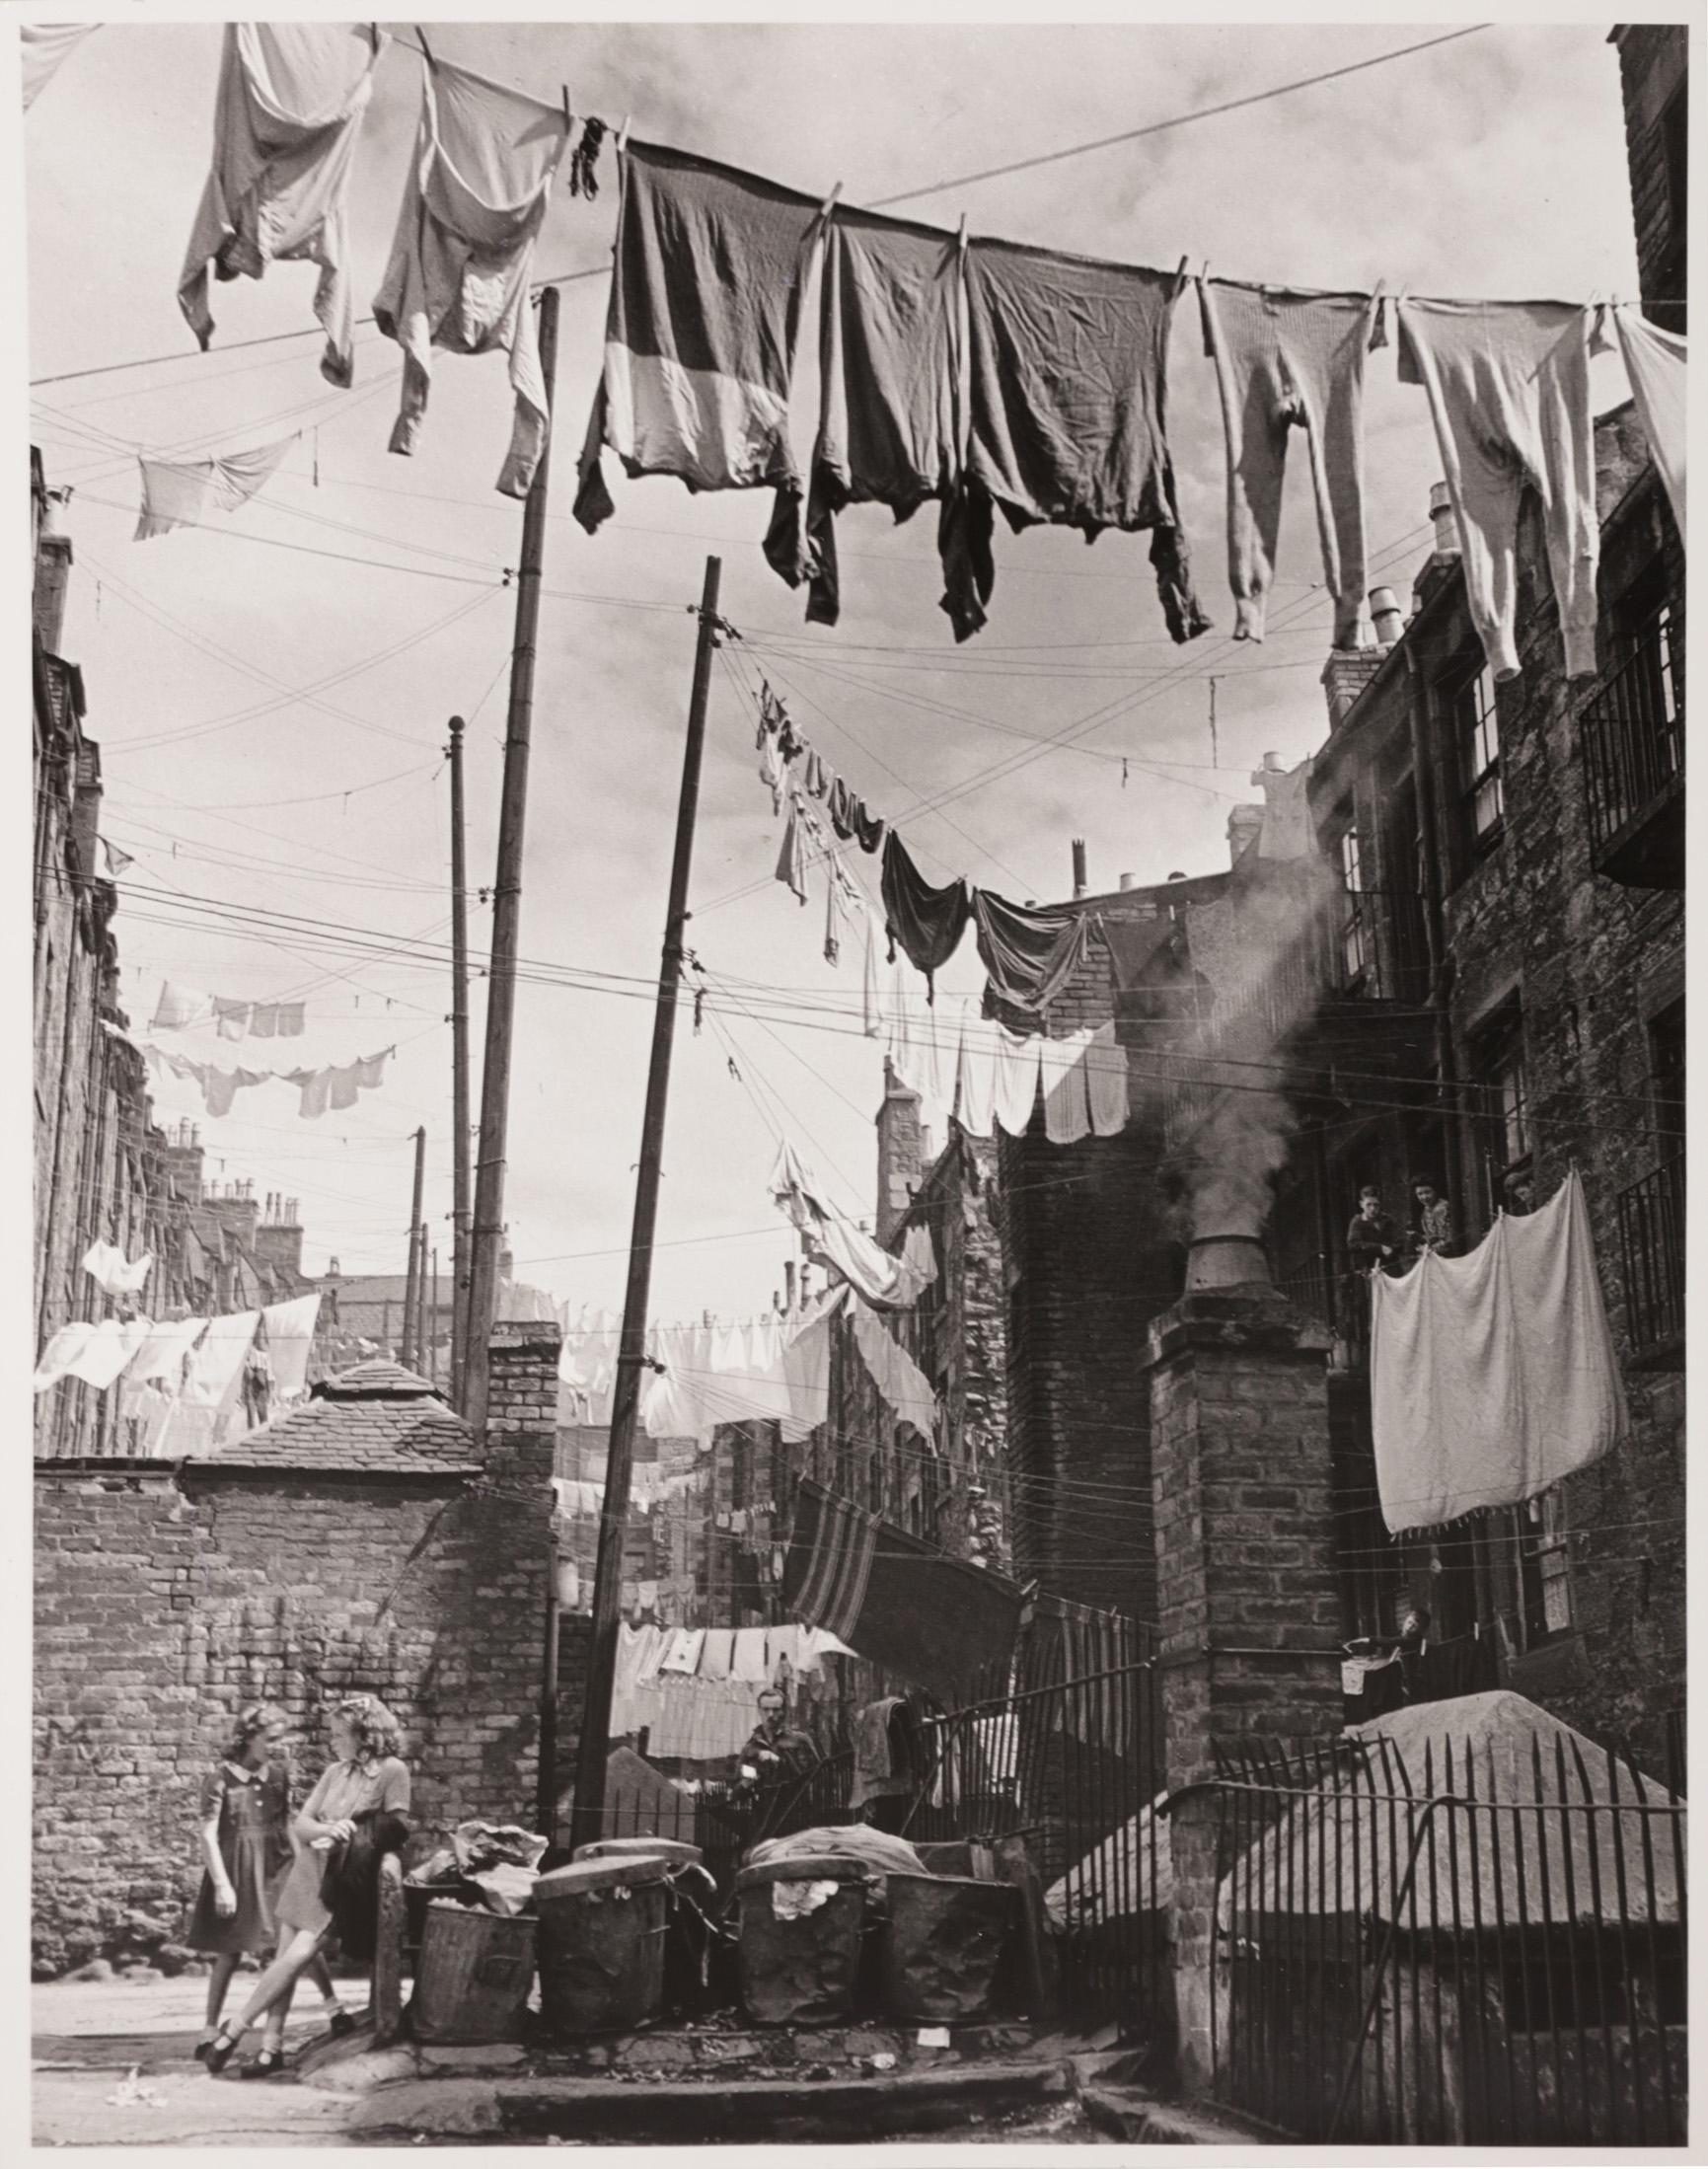 Wolfgang Suschitzky Black and White Photograph - Washing Strung Between the Tenements, Dundee, Scotland, 1946